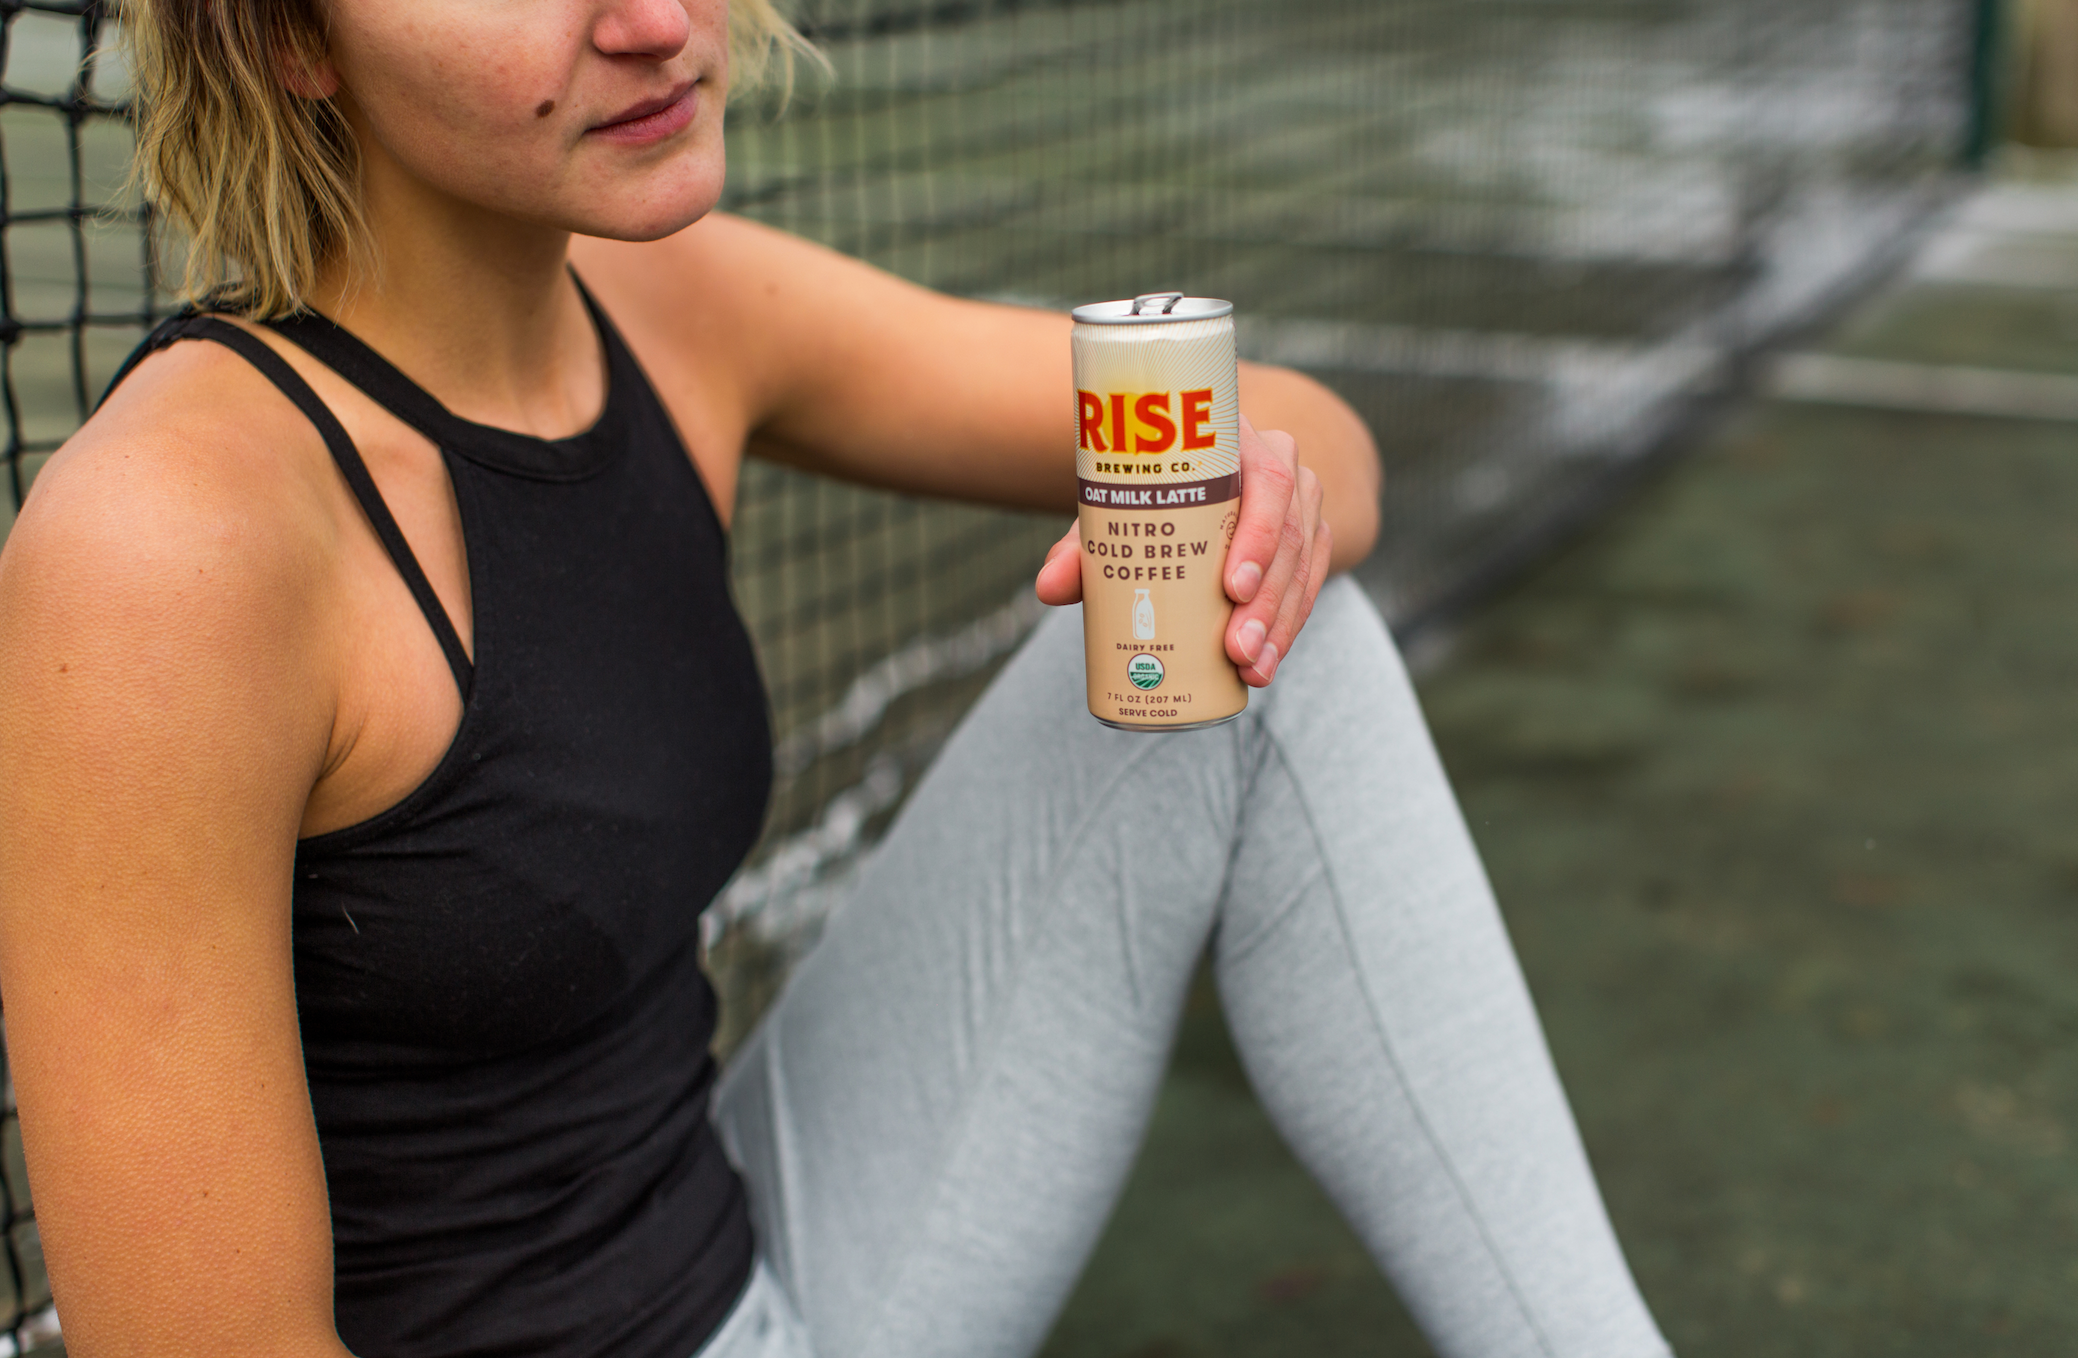 Sporty woman on tennis court with RISE Nitro Brewing Co. Oat Milk Latte can in her hand